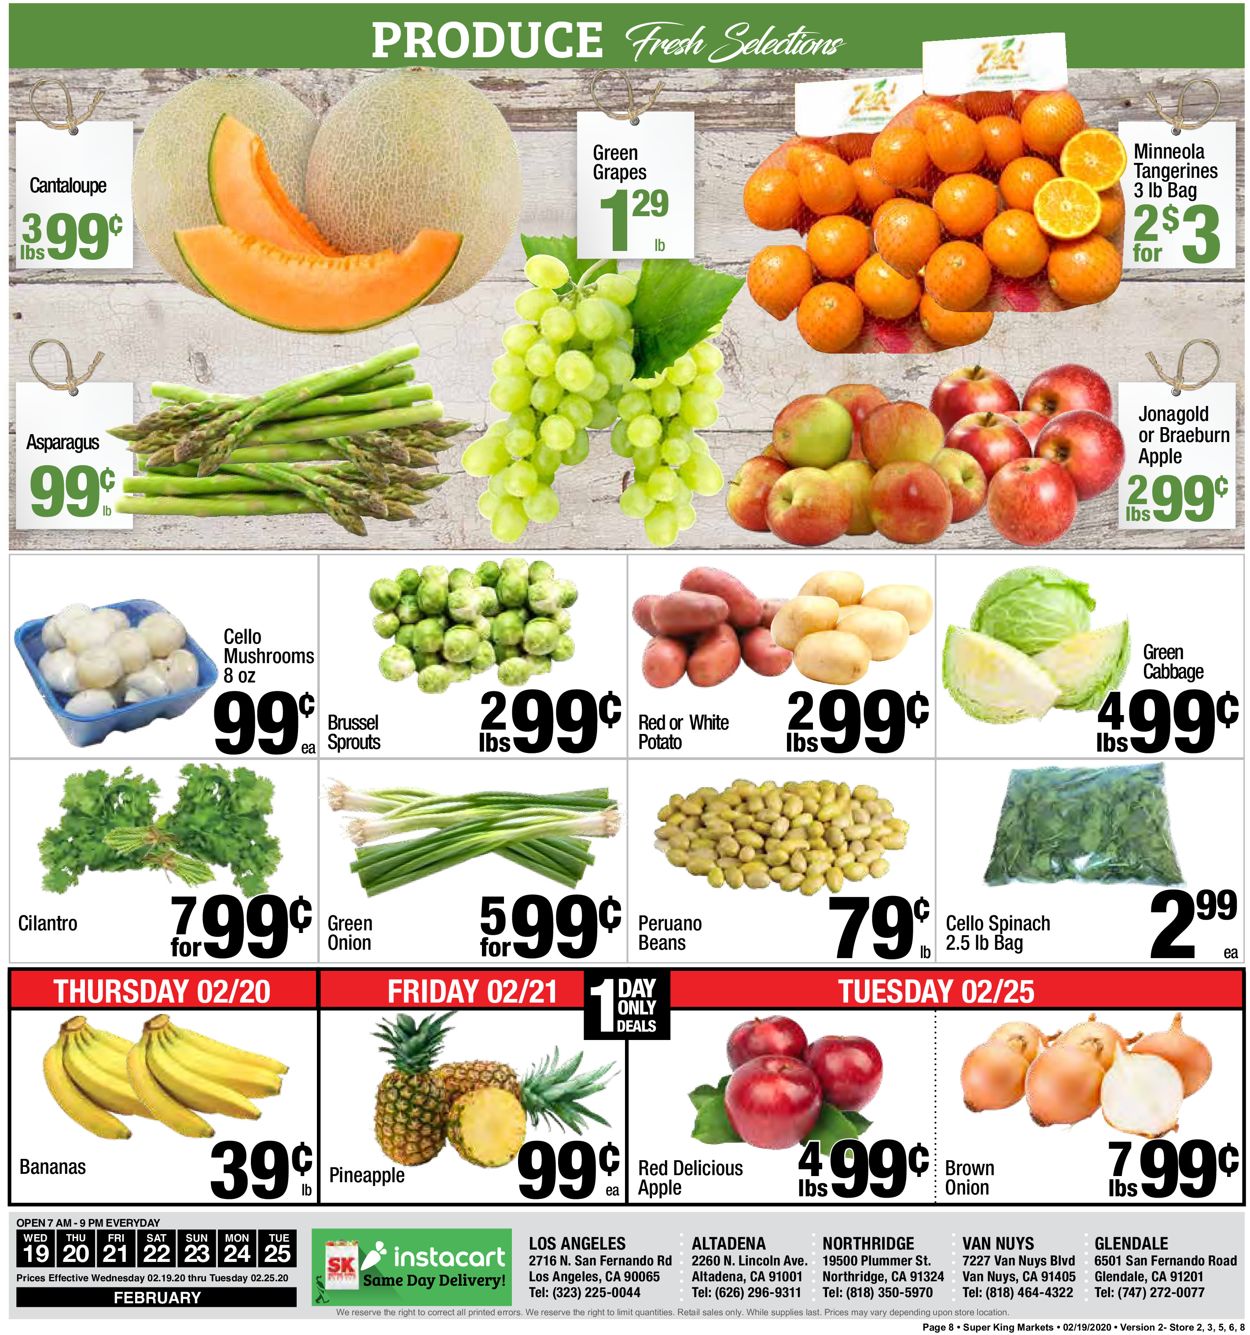 Catalogue Super King Market from 02/19/2020